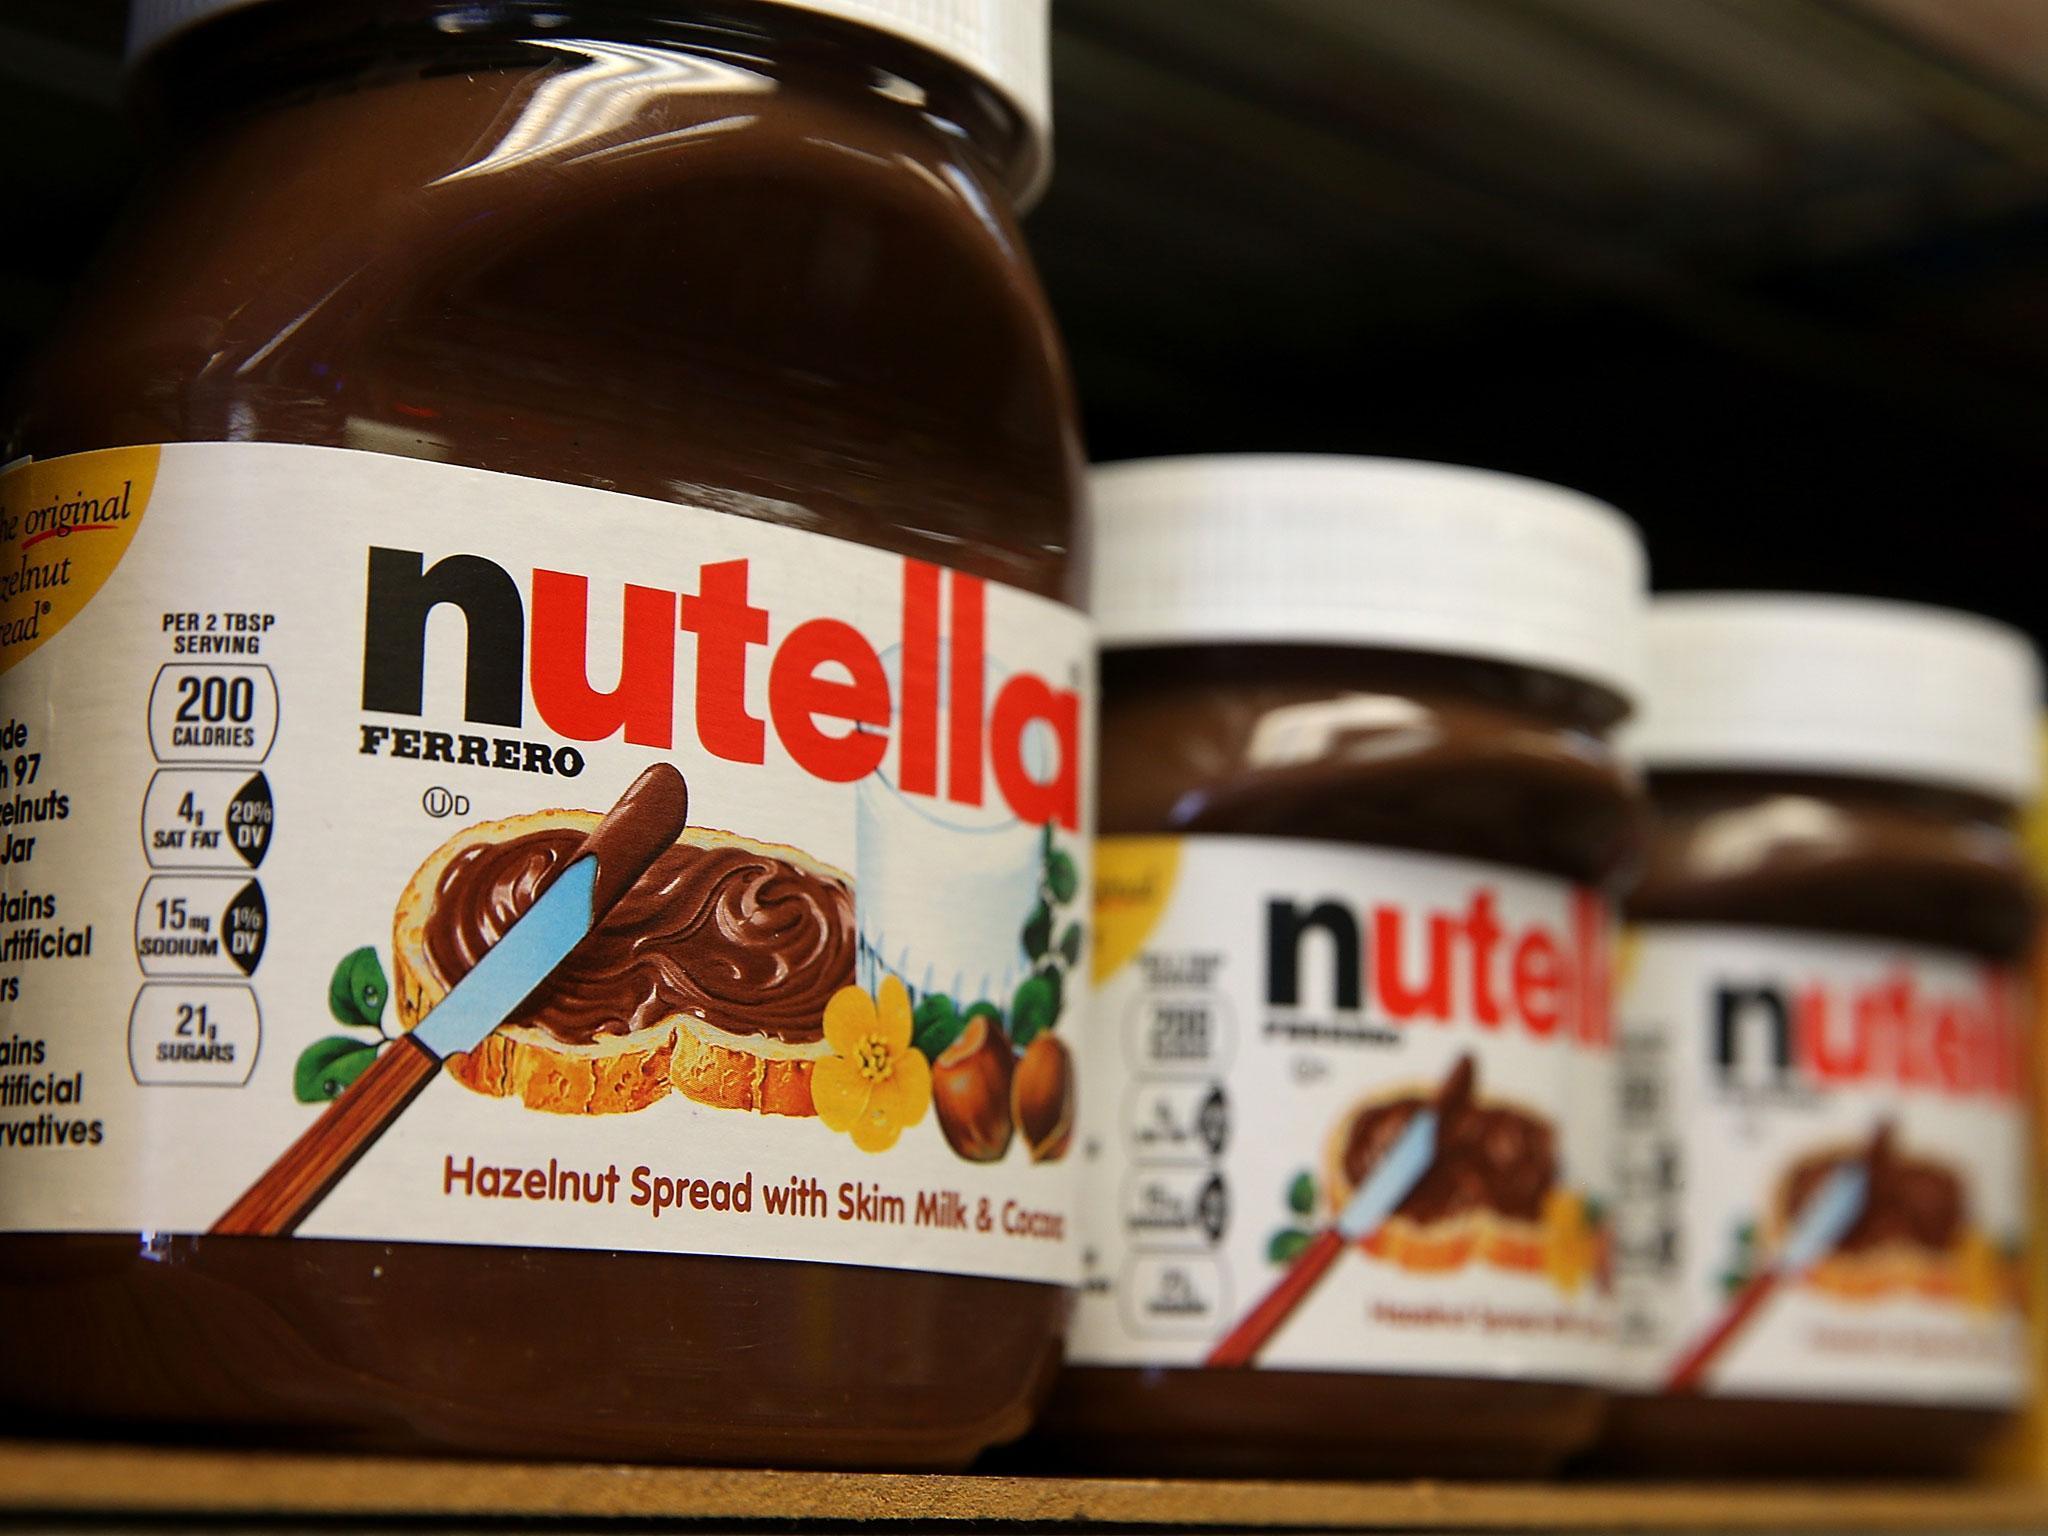 Last weeks reports suggested the processed palm oil used in the production of the hazelnut spread might be carcinogenic